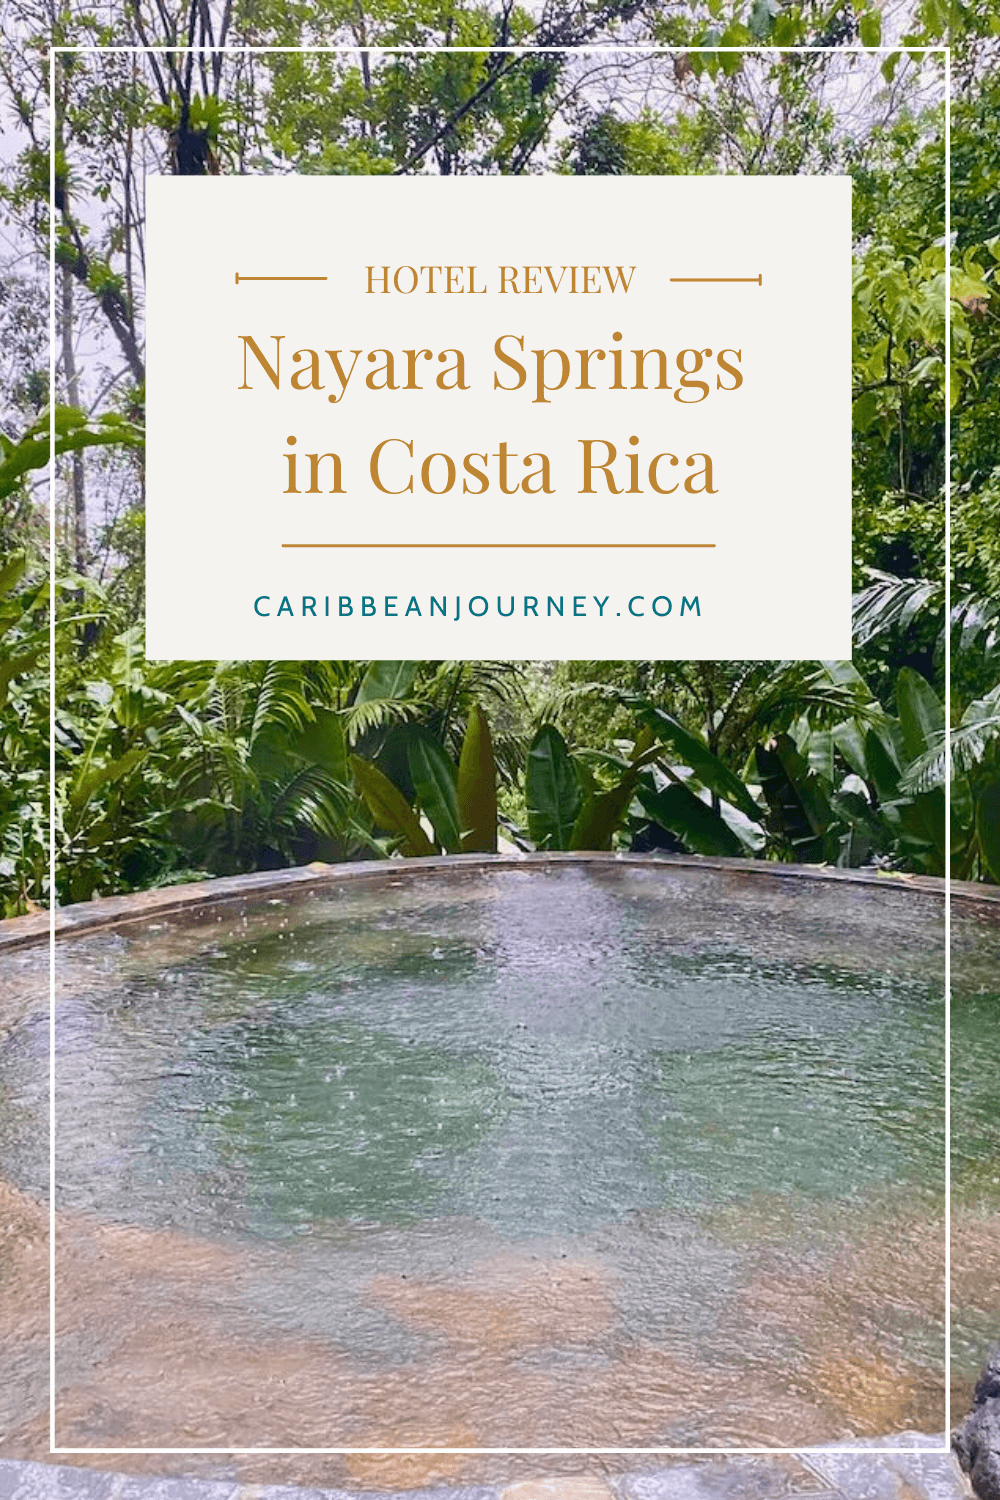 Hotel review of Nayara Springs in Costa Rica with hot springs in the rain.